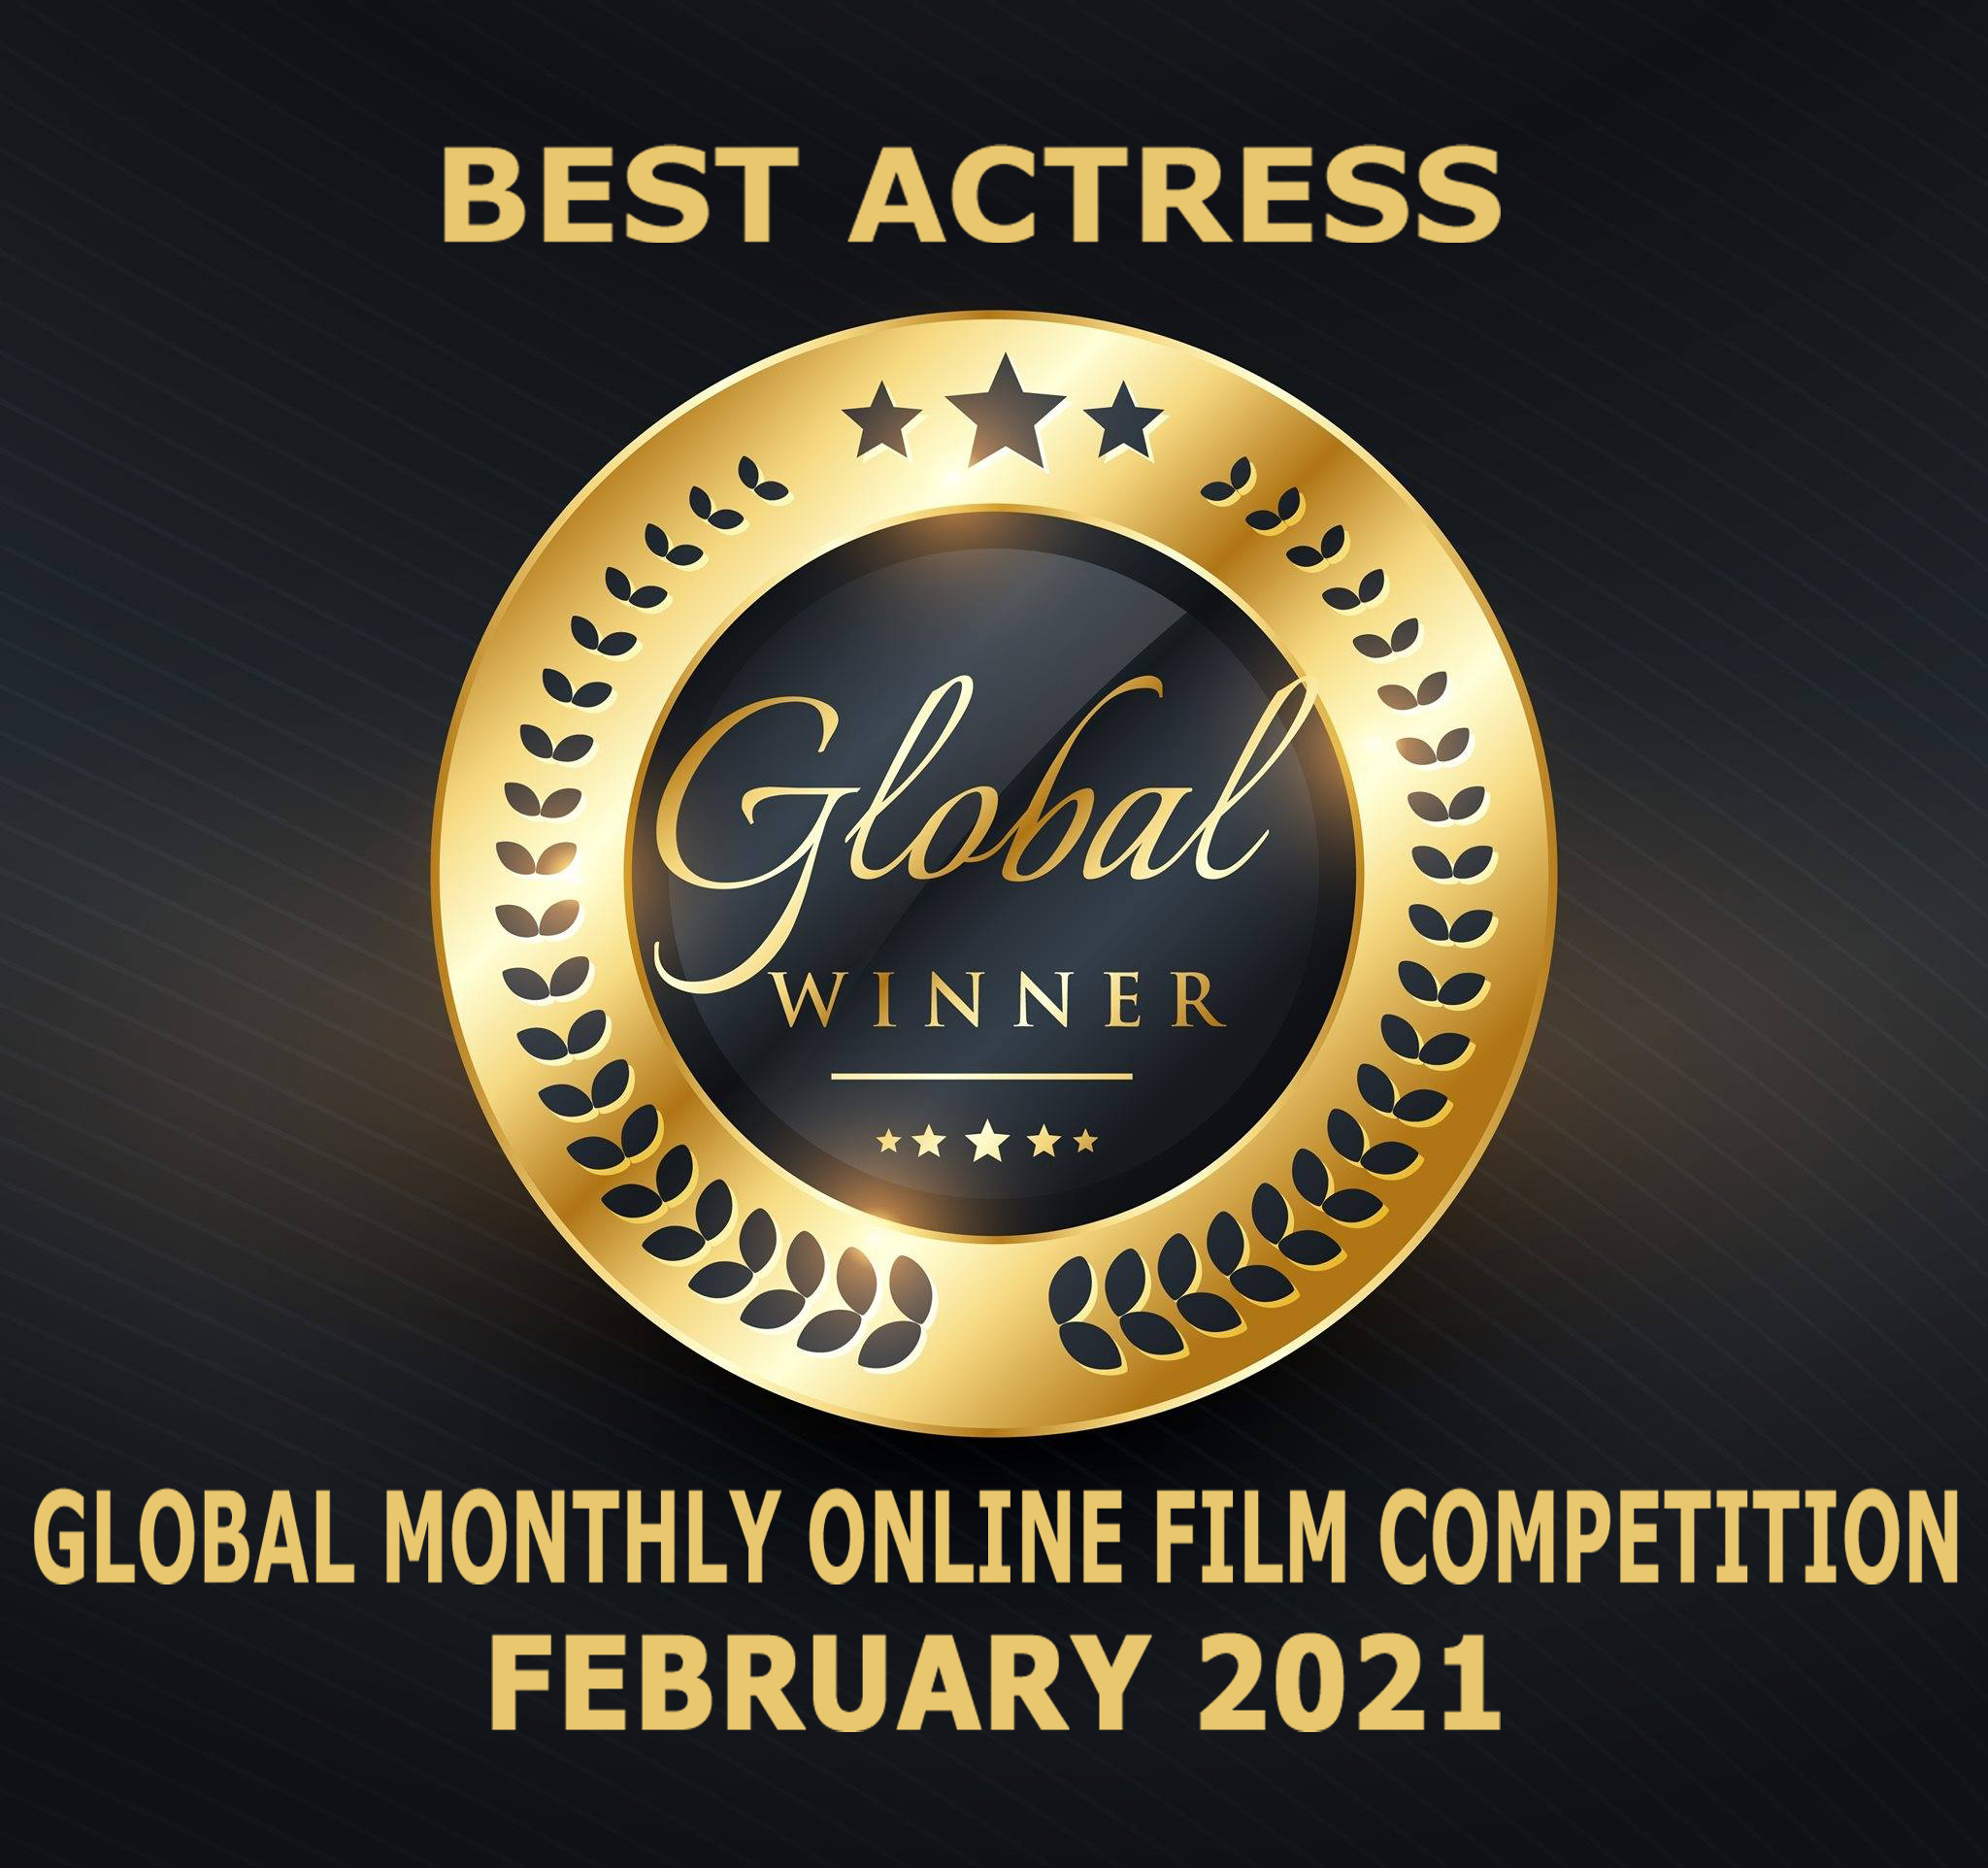 Best Actress for ‘Ascension Chronicles’, Global Monthly Online Film Awards, February 2021.